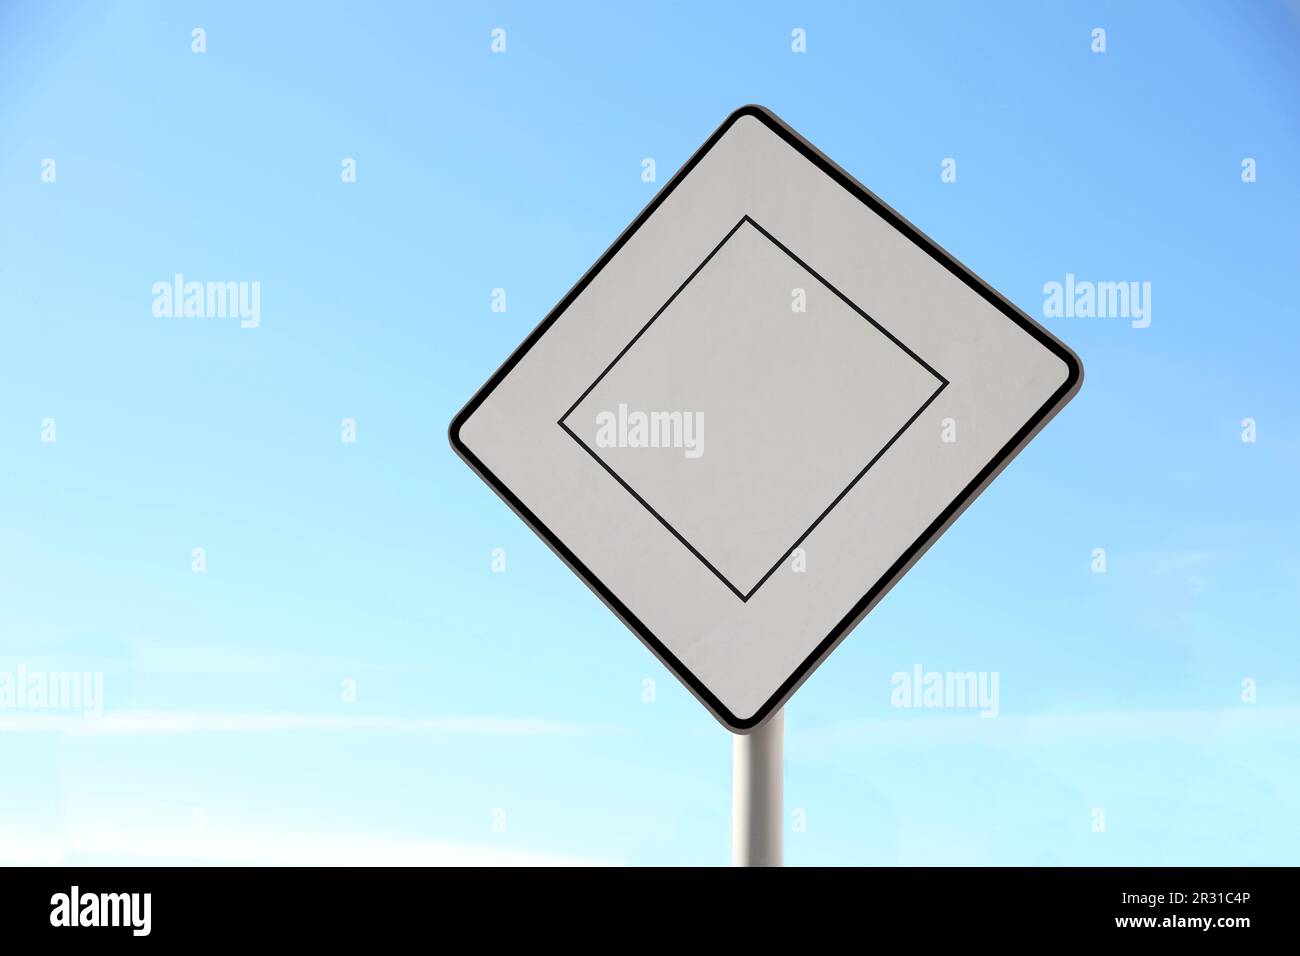 Priority road sign against blue sky on city street Stock Photo